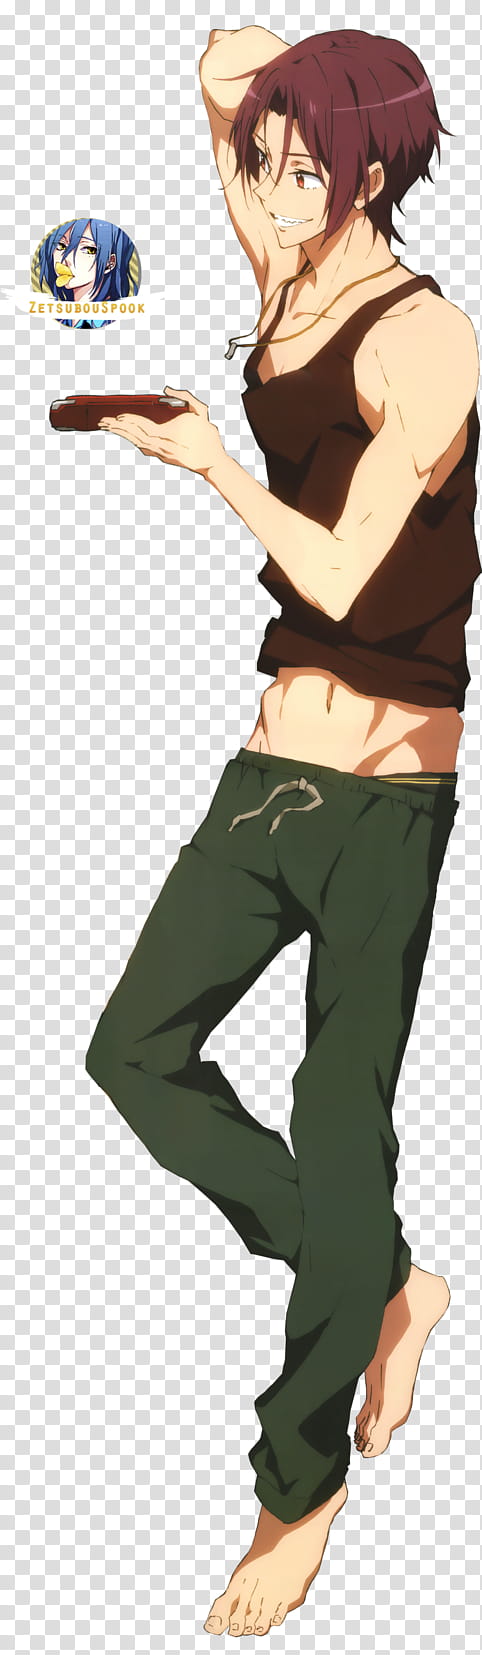 Free! Rin Matsuoka transparent background PNG clipart